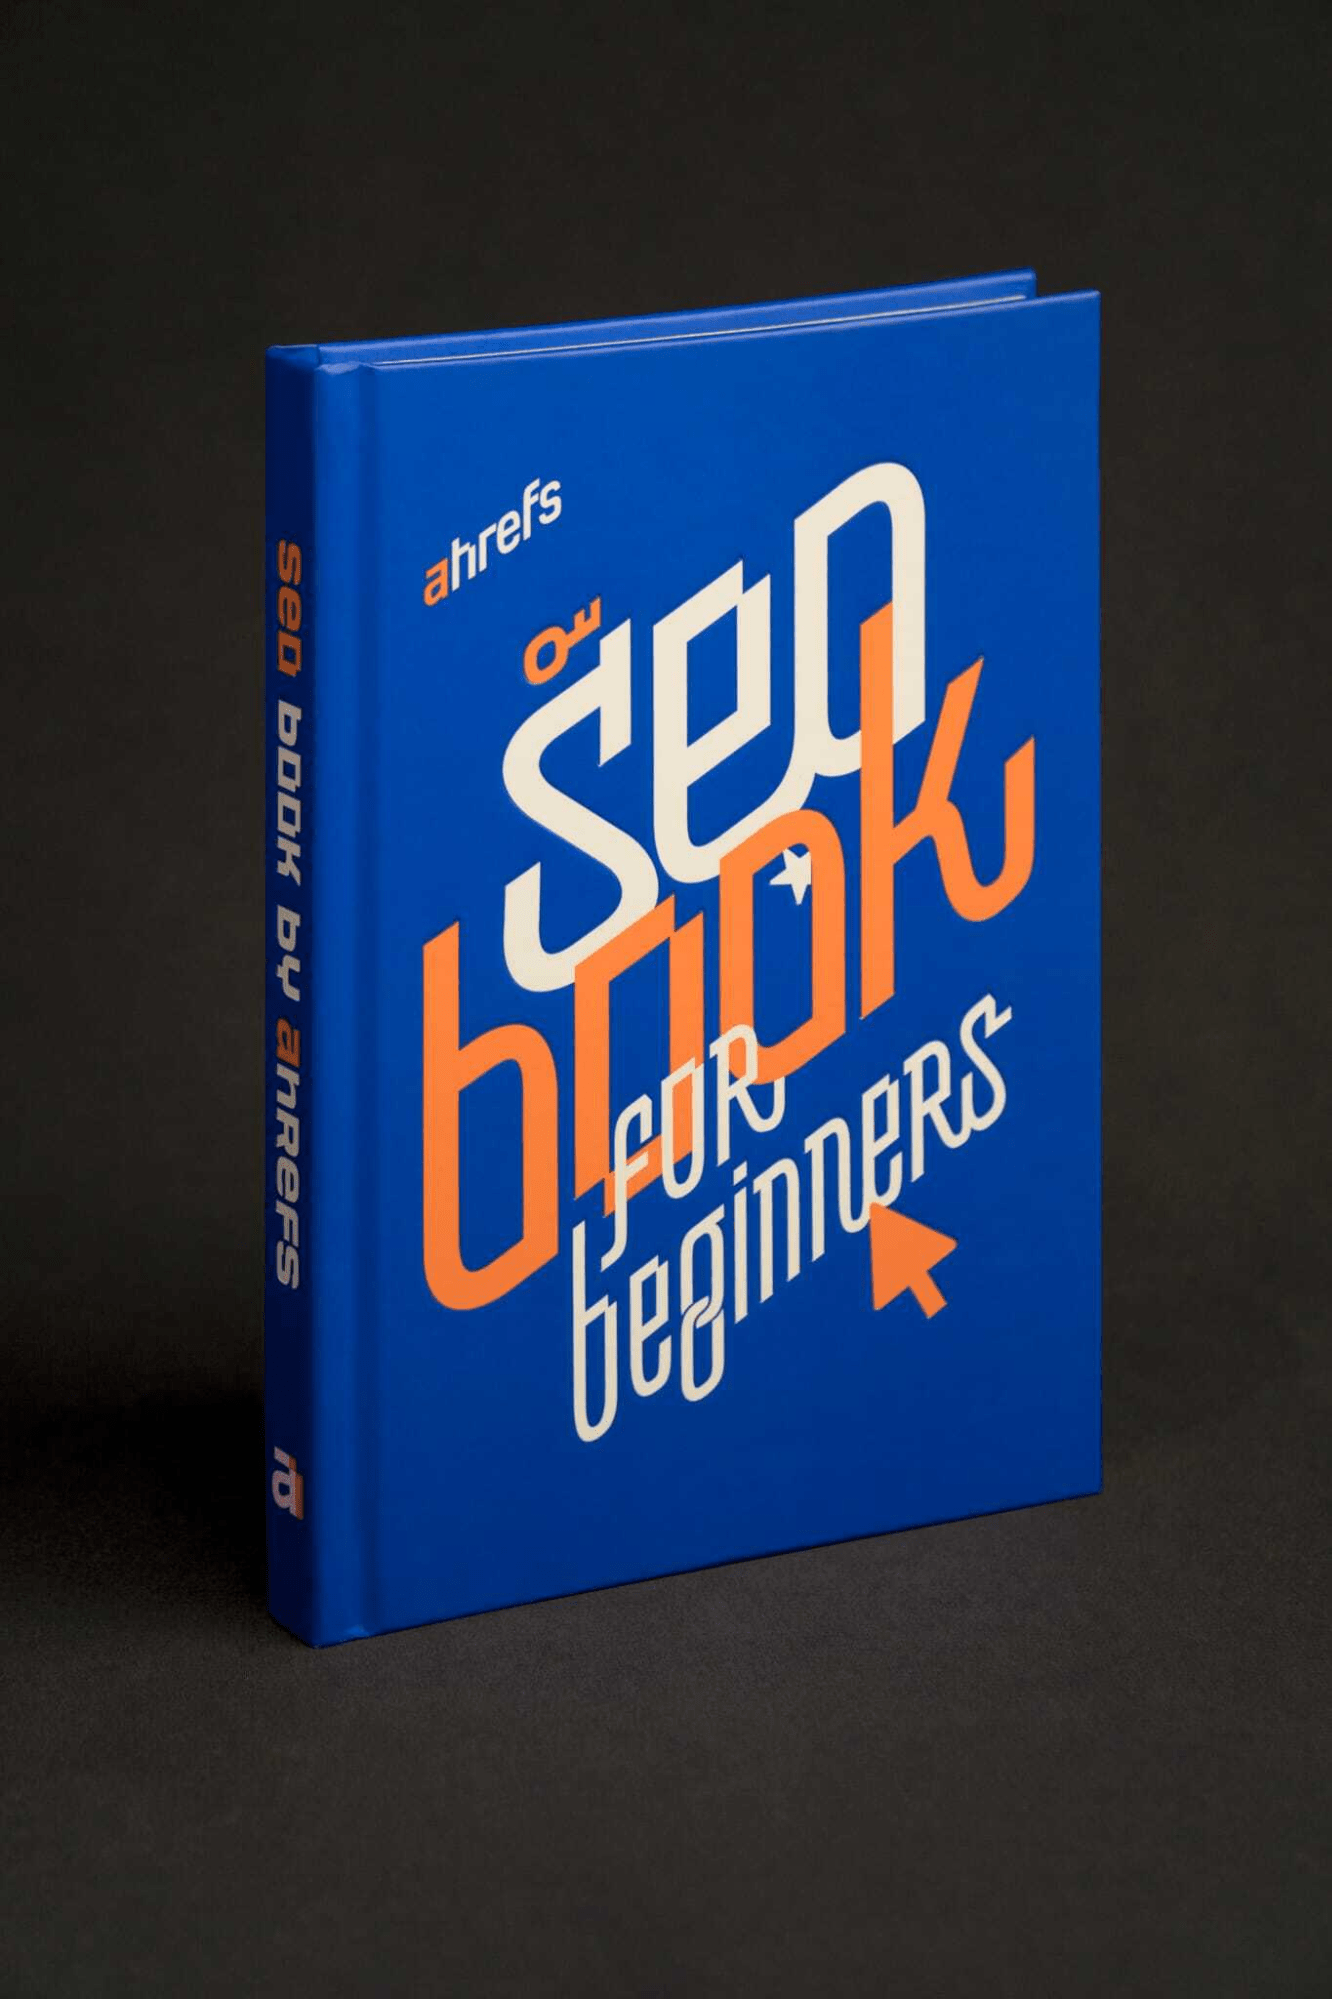 Our stunning SEO Book for Beginners
